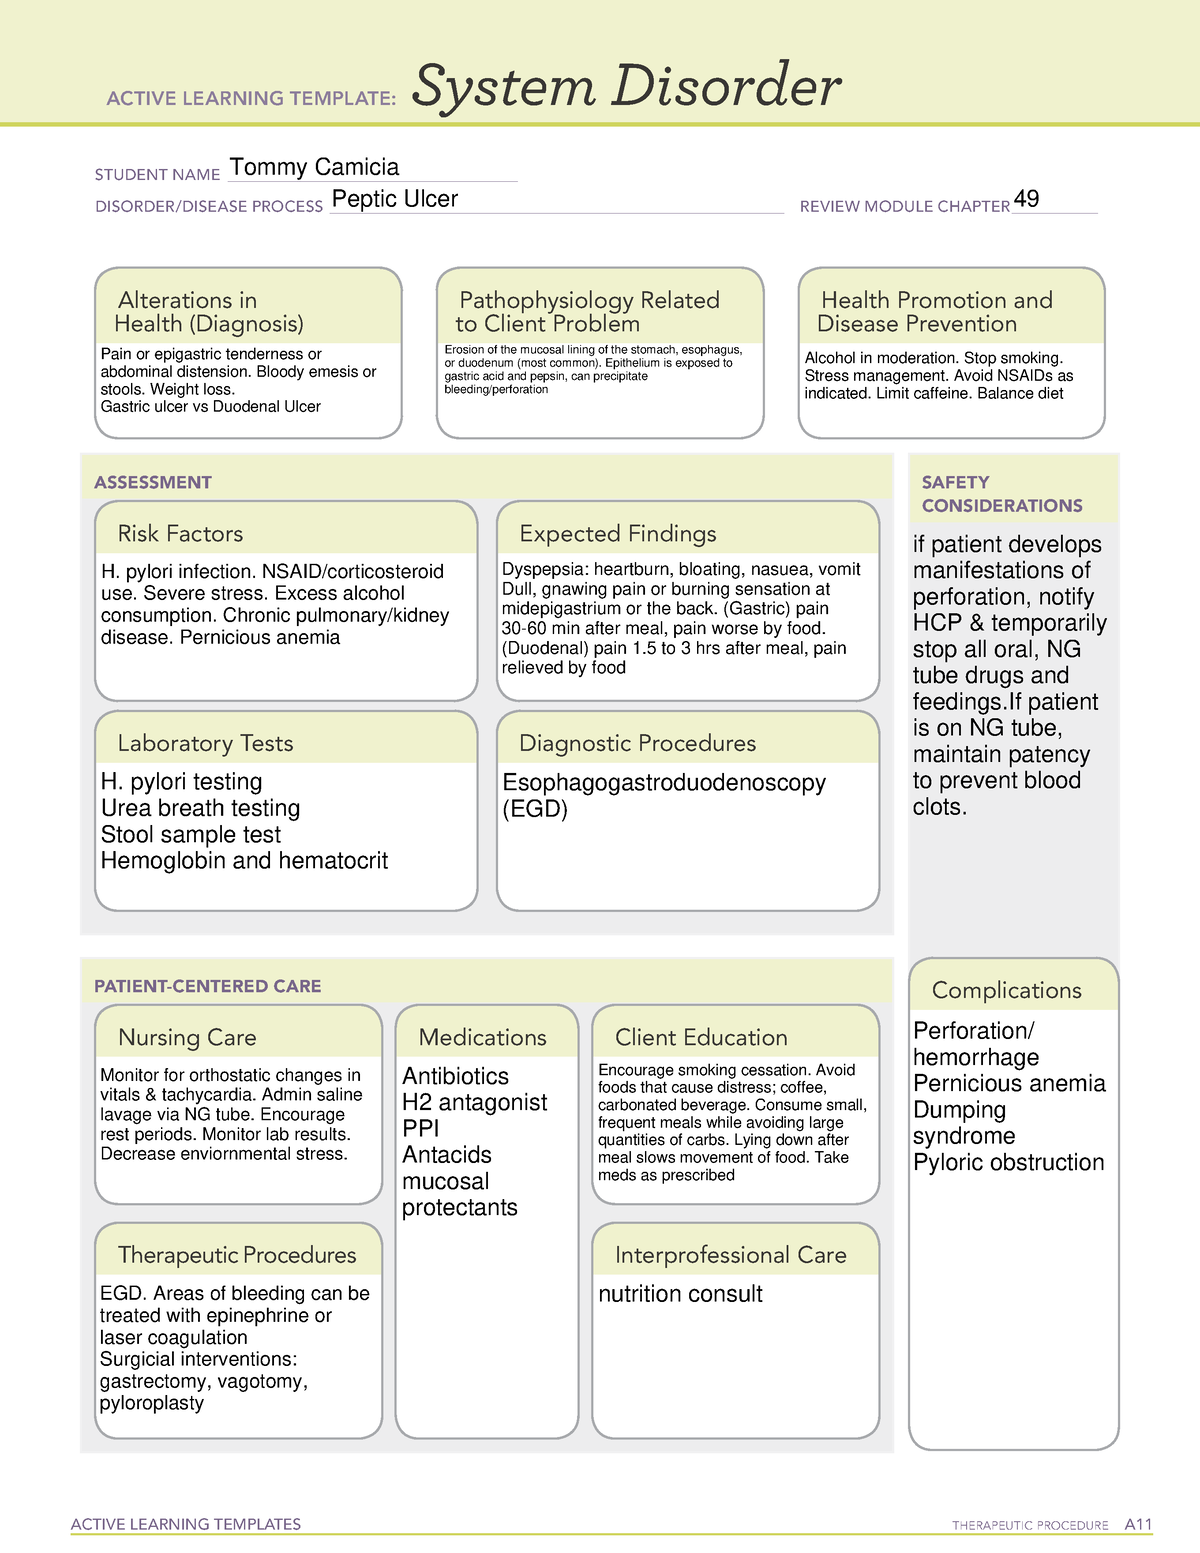 Ati System Disorder Peptic Ulcer Disease Active Learning Template The